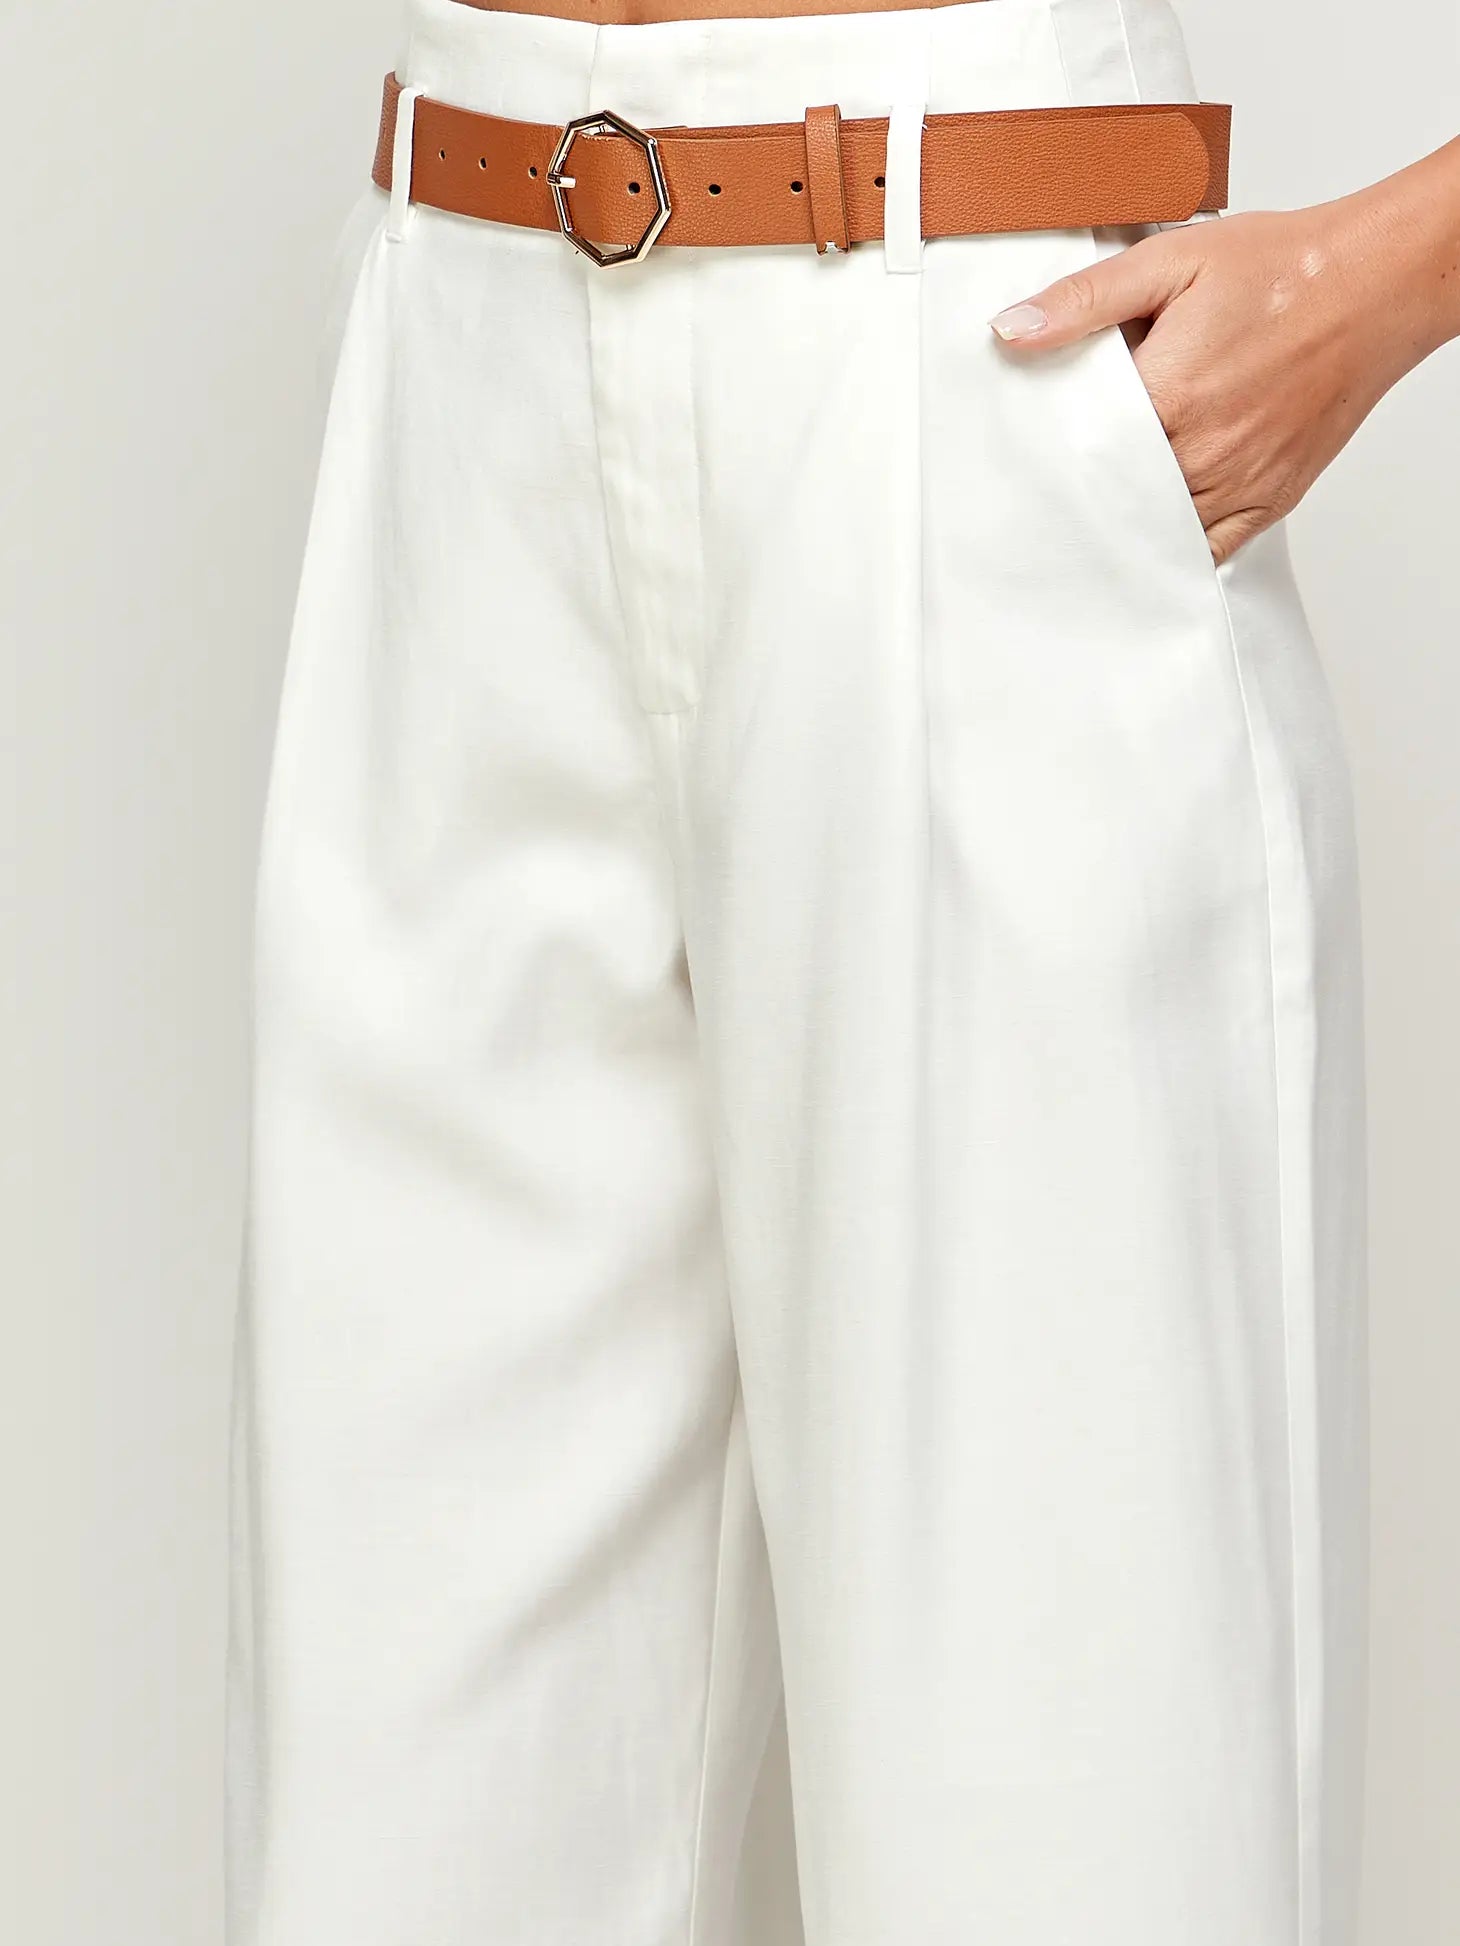 White wide legged trousers, Ellison pants, whimsy whoo boutique store, boutique Fayetteville ar